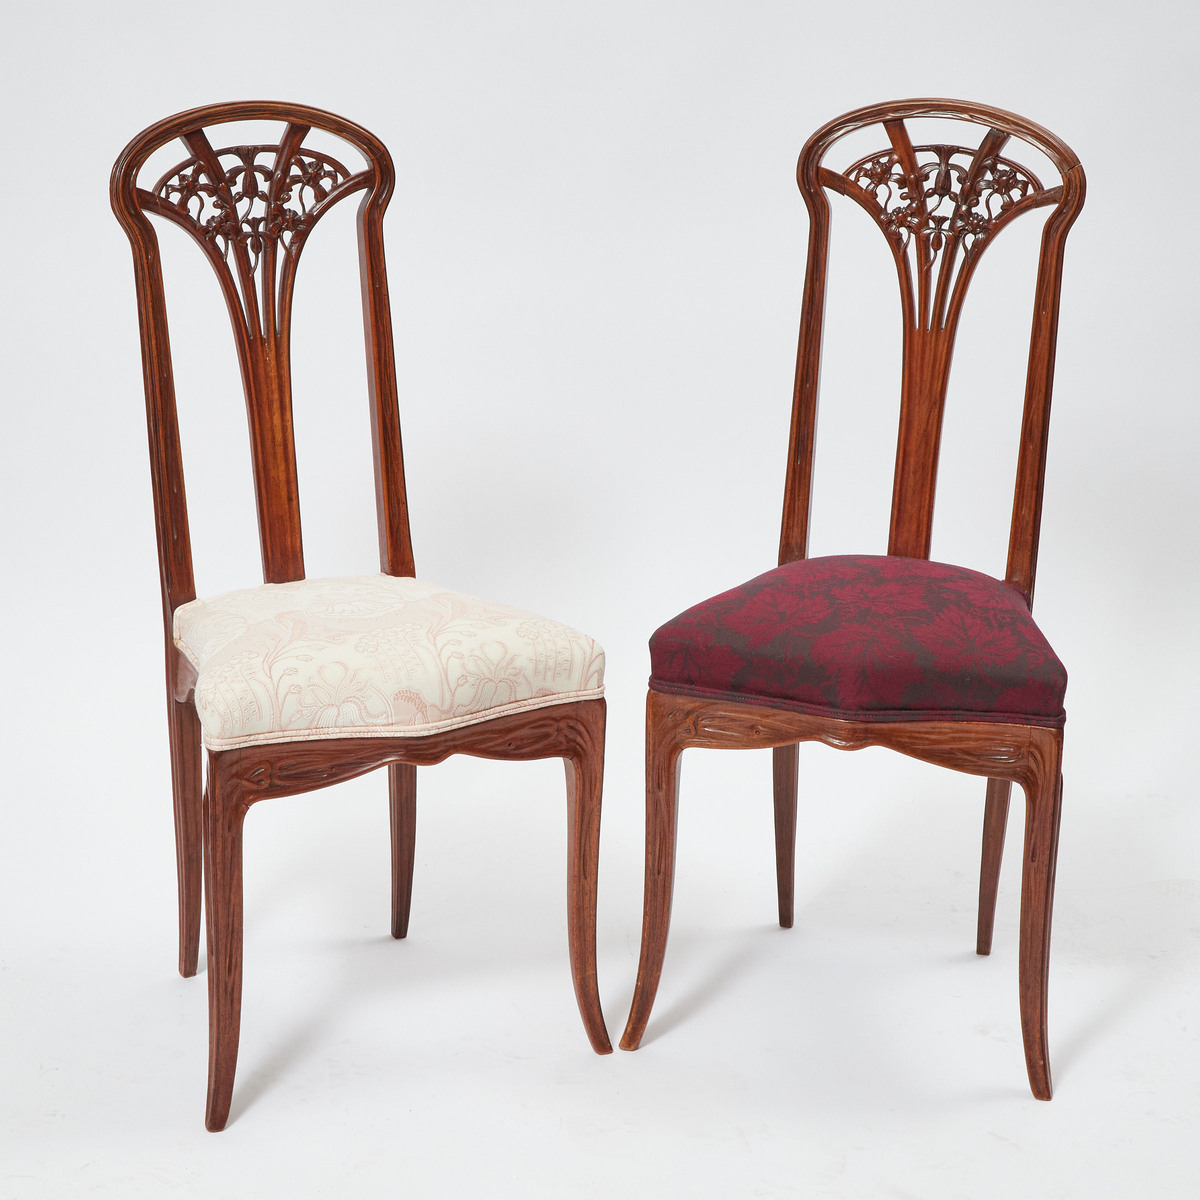 Pair of Louis Majorelle Frères et Cie Carved Mahogany 'Clematis' Side Chairs, c.1900, 37 x 17 x 19.2